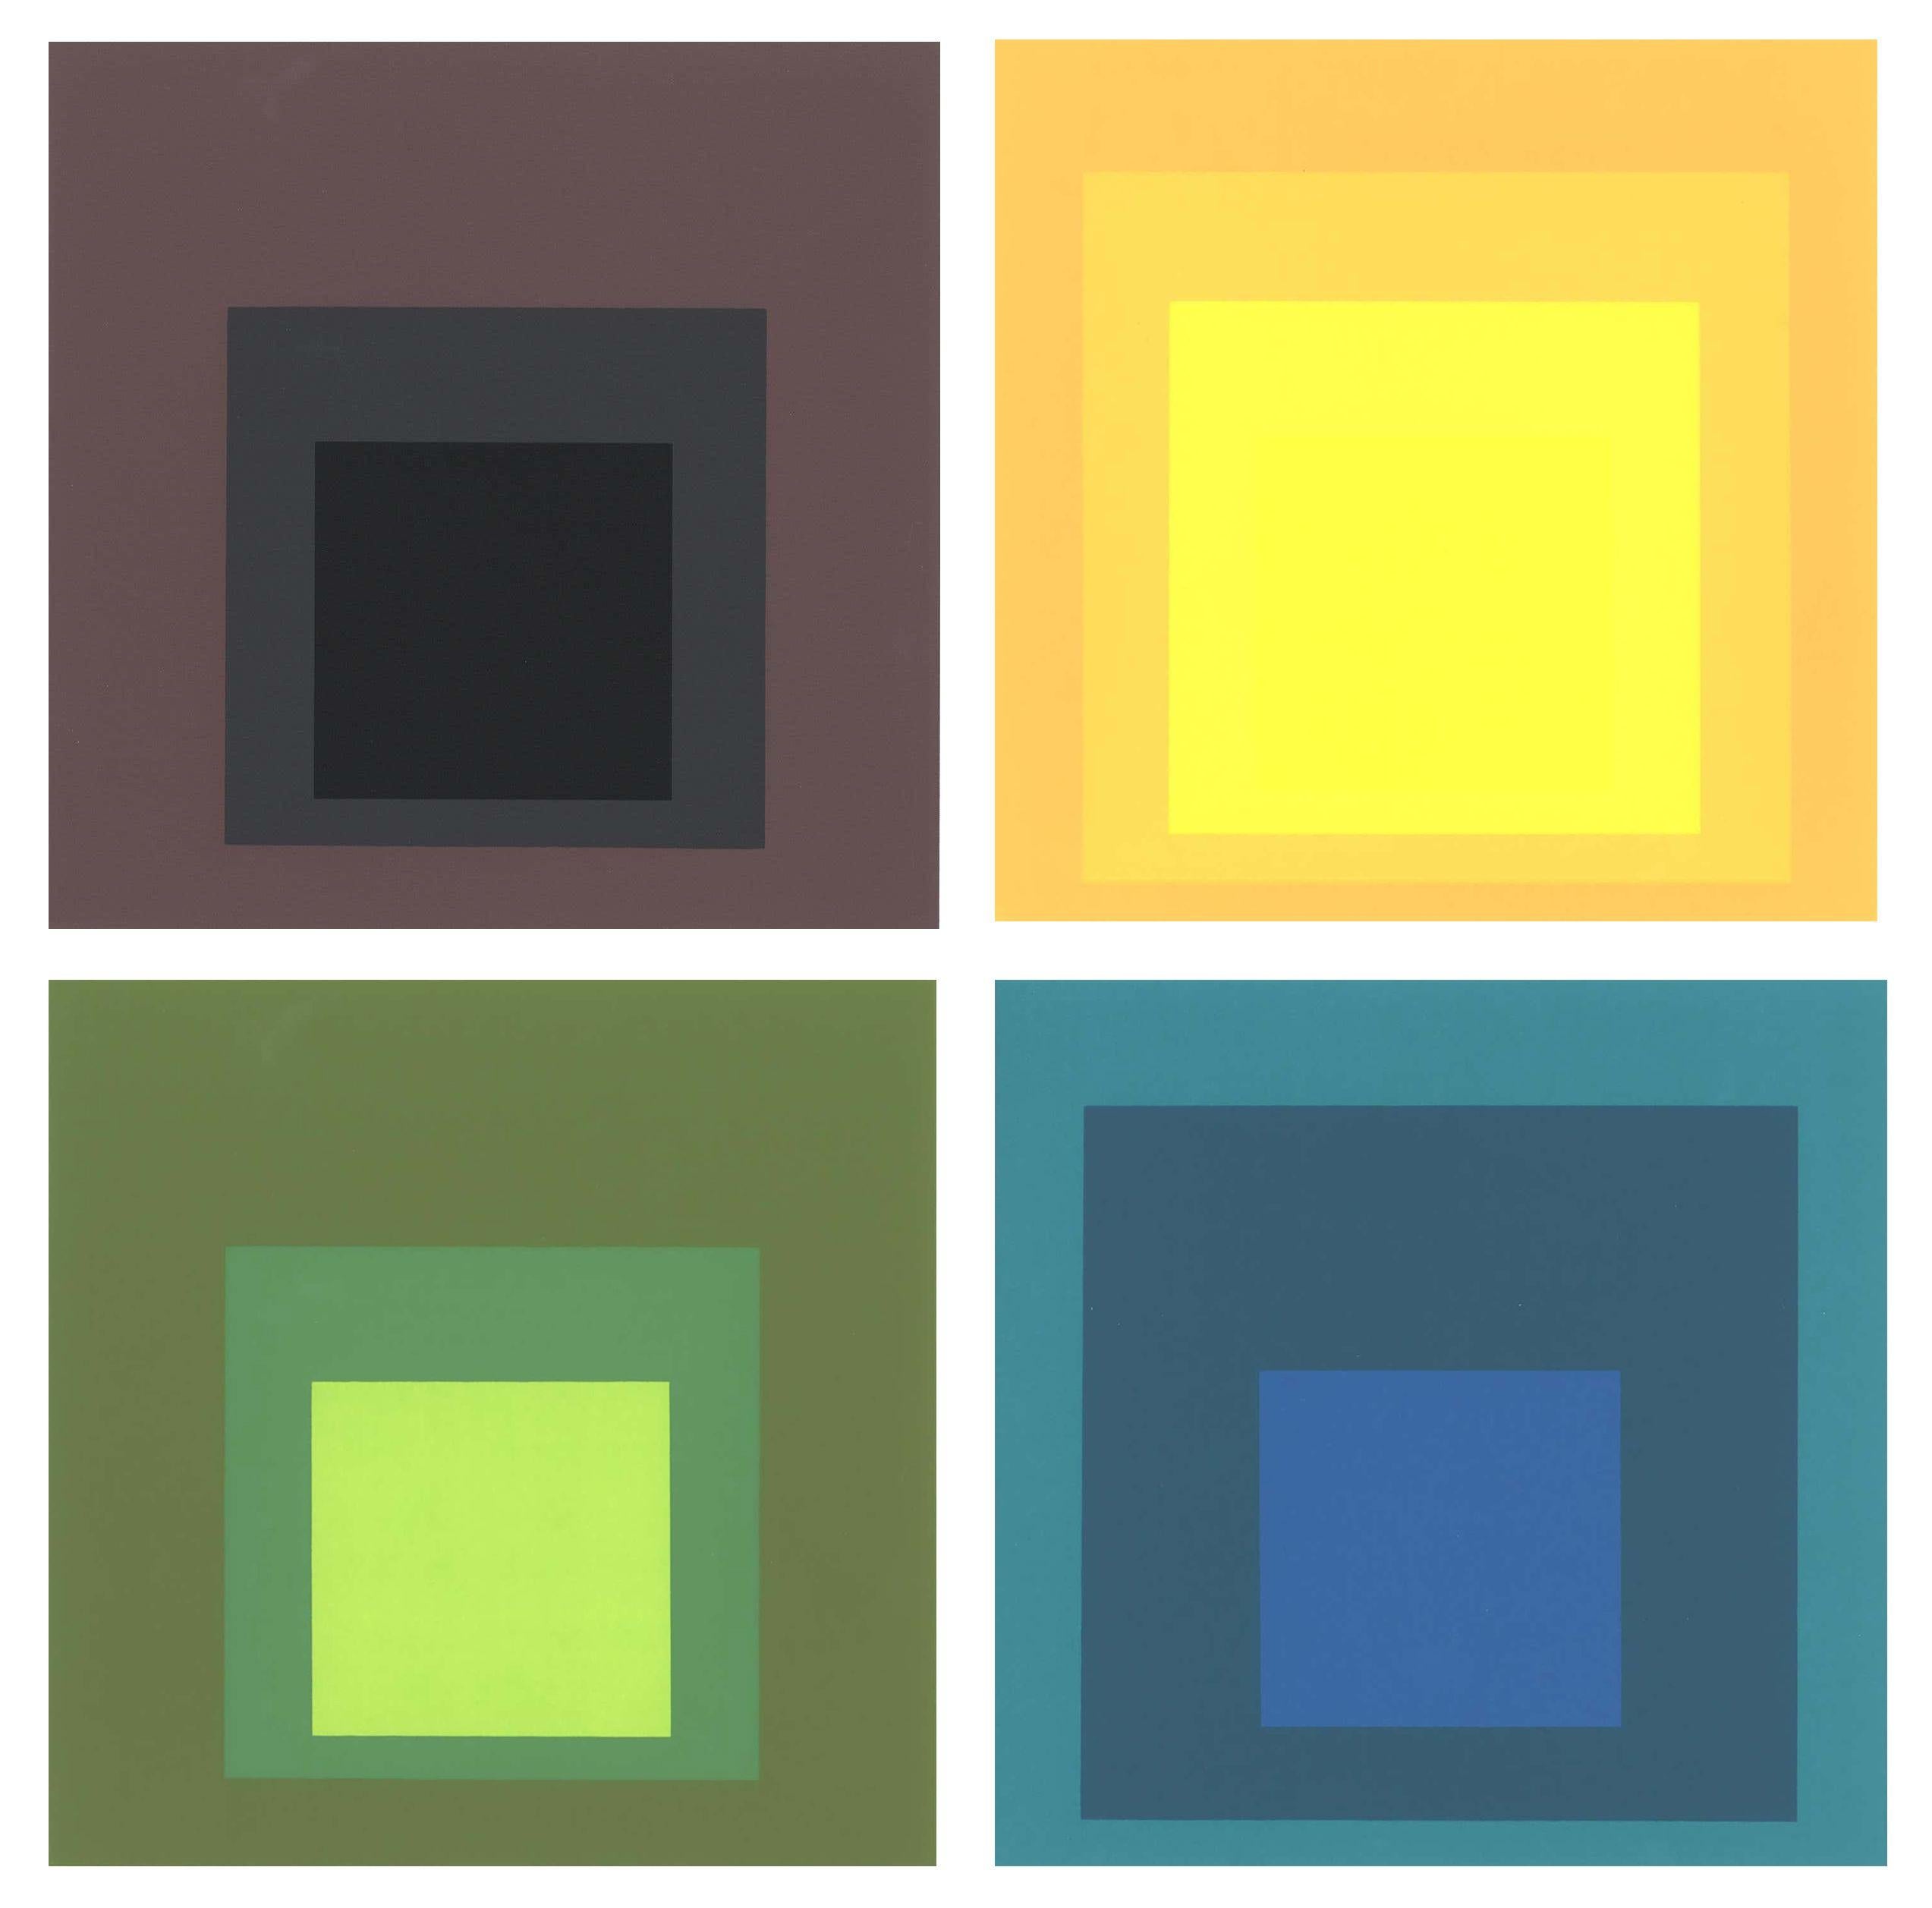 (after) Josef Albers Abstract Print - Josef Albers Homage to the Square 1964 (set of 4 printed works) 